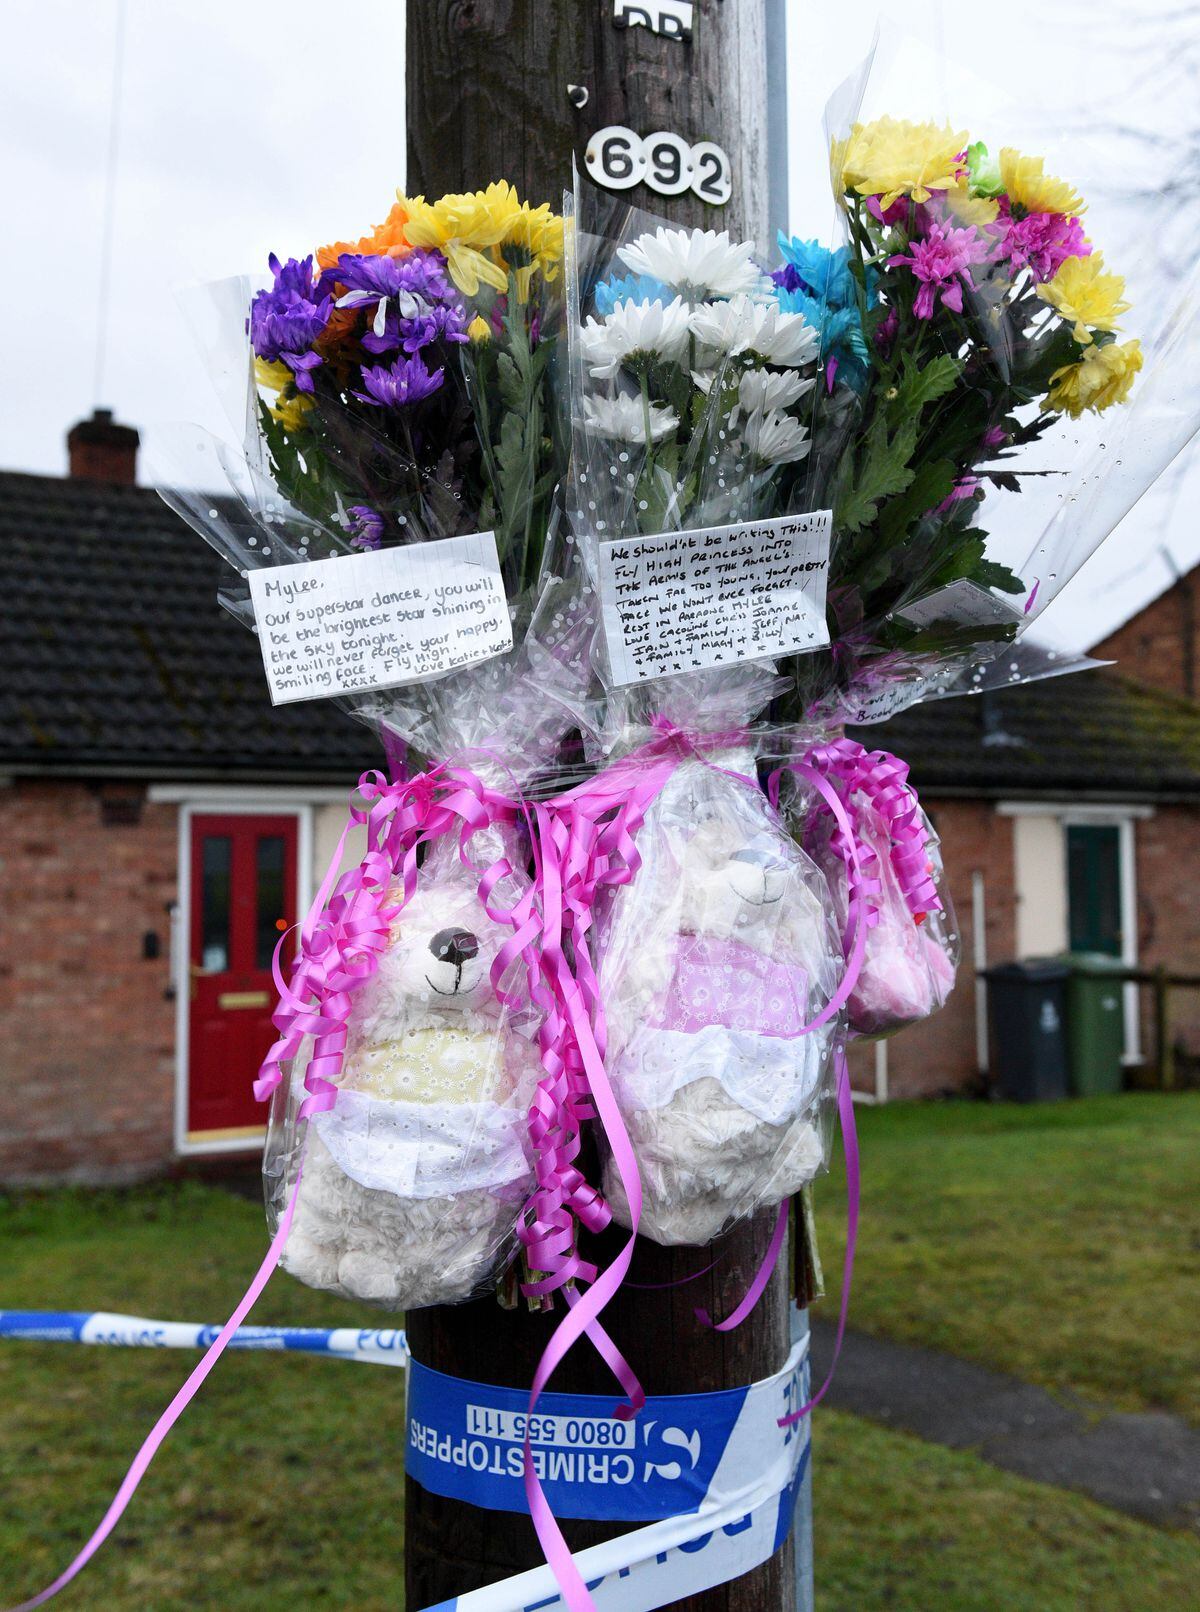 Some tributes have been tied to the nearby telegraph pole